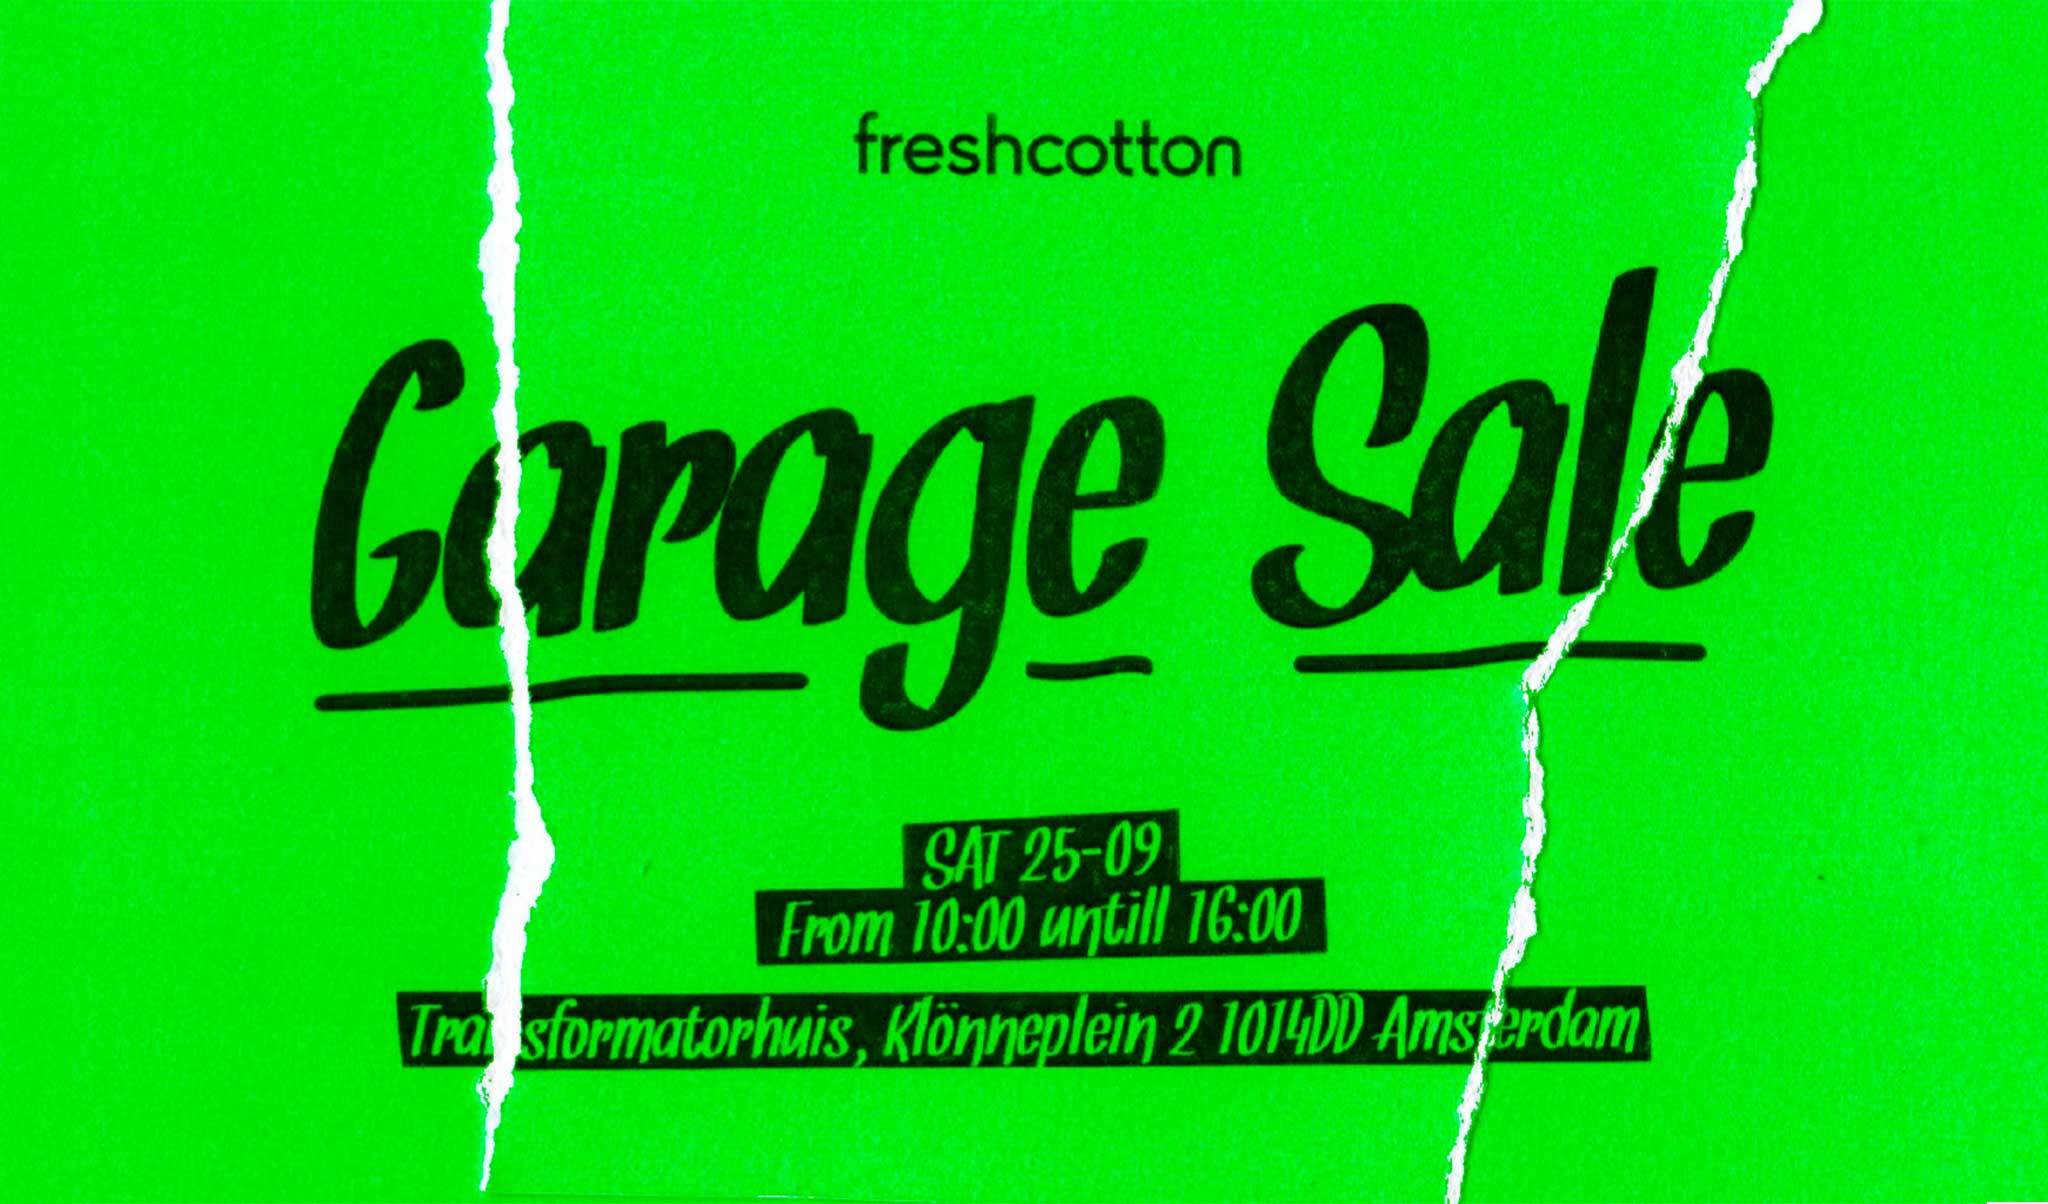 GARAGE SALE ’21. Are you ready?